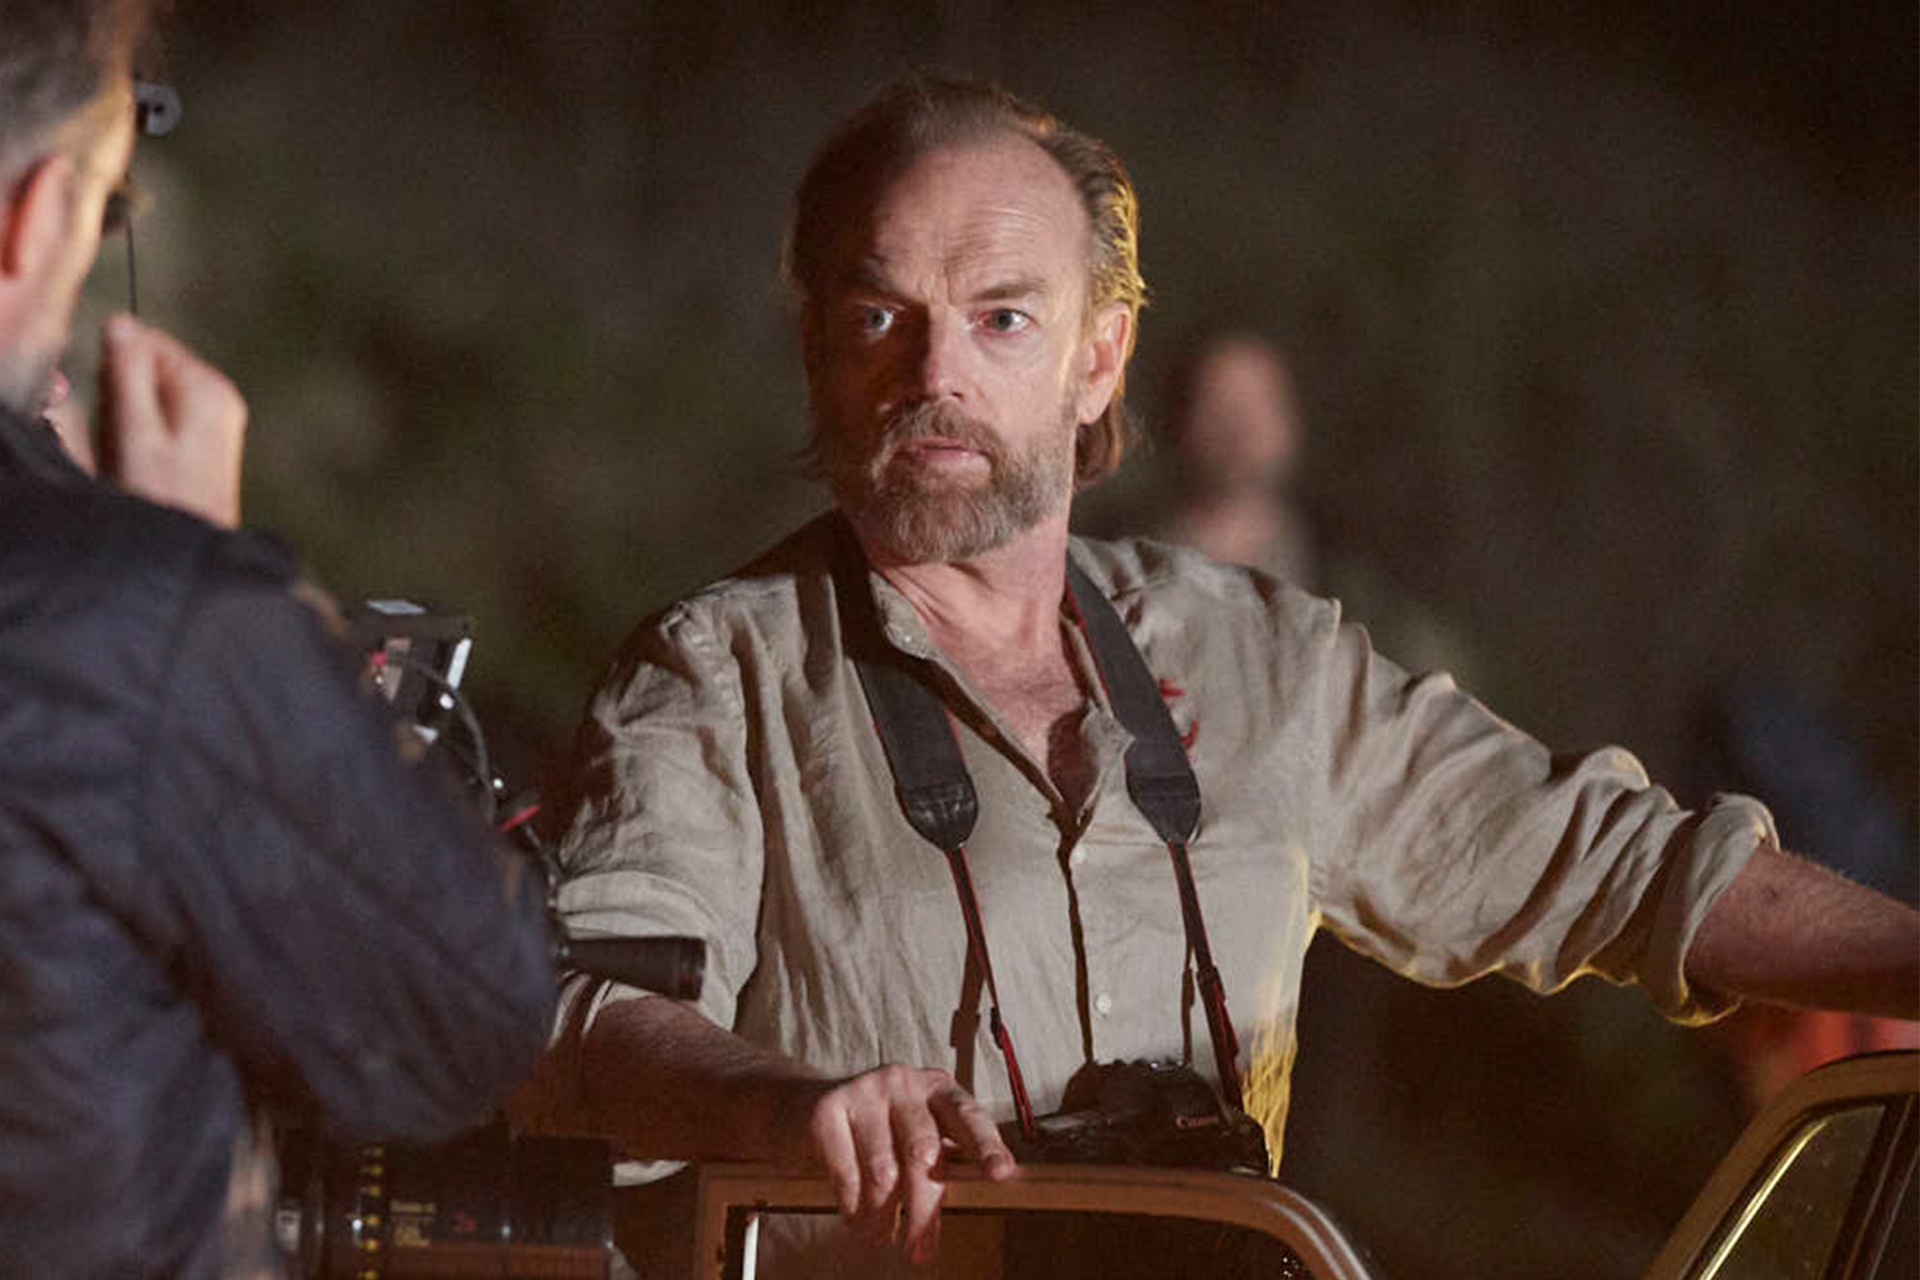 Hugo Weaving on his new TV drama and how most scripts he reads are